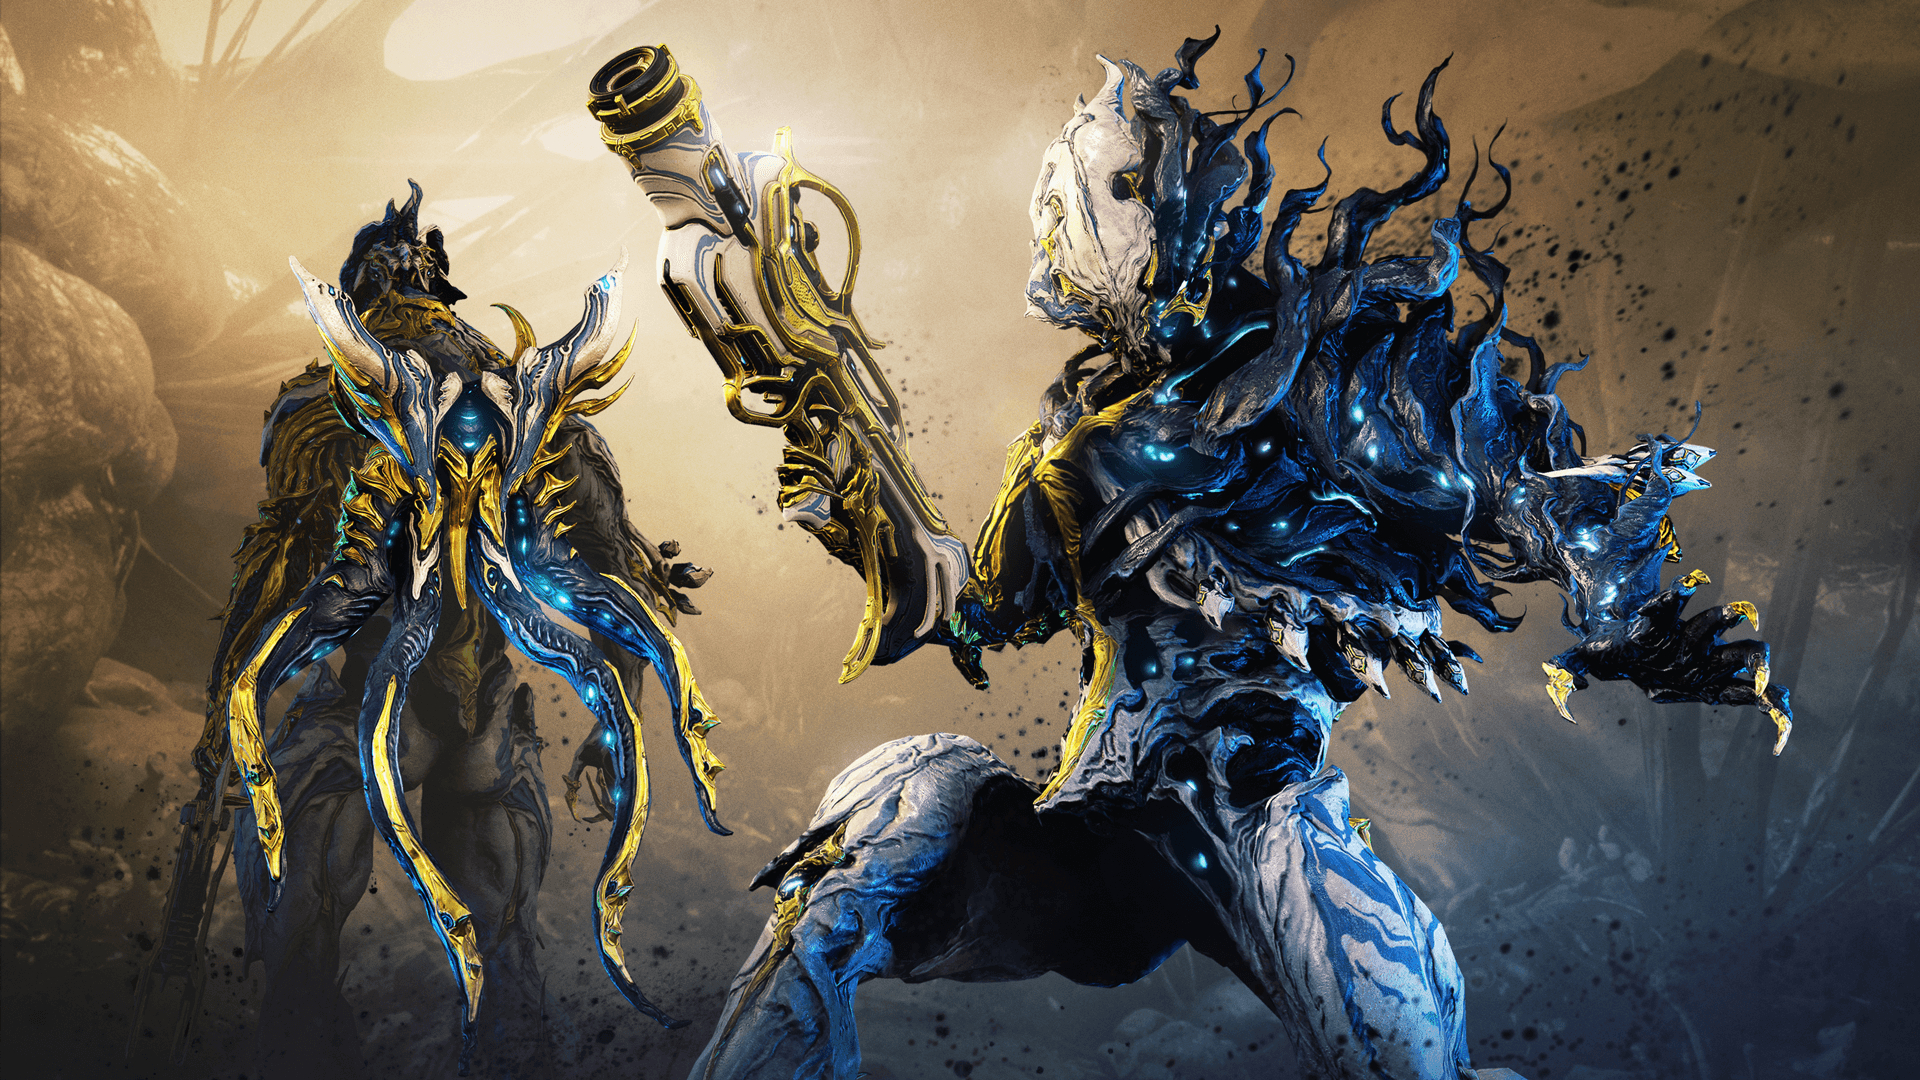 Warframe Nidus Prime Wallpaper Hd Games 4k Wallpapers Images Photos And Background Wallpapers Den